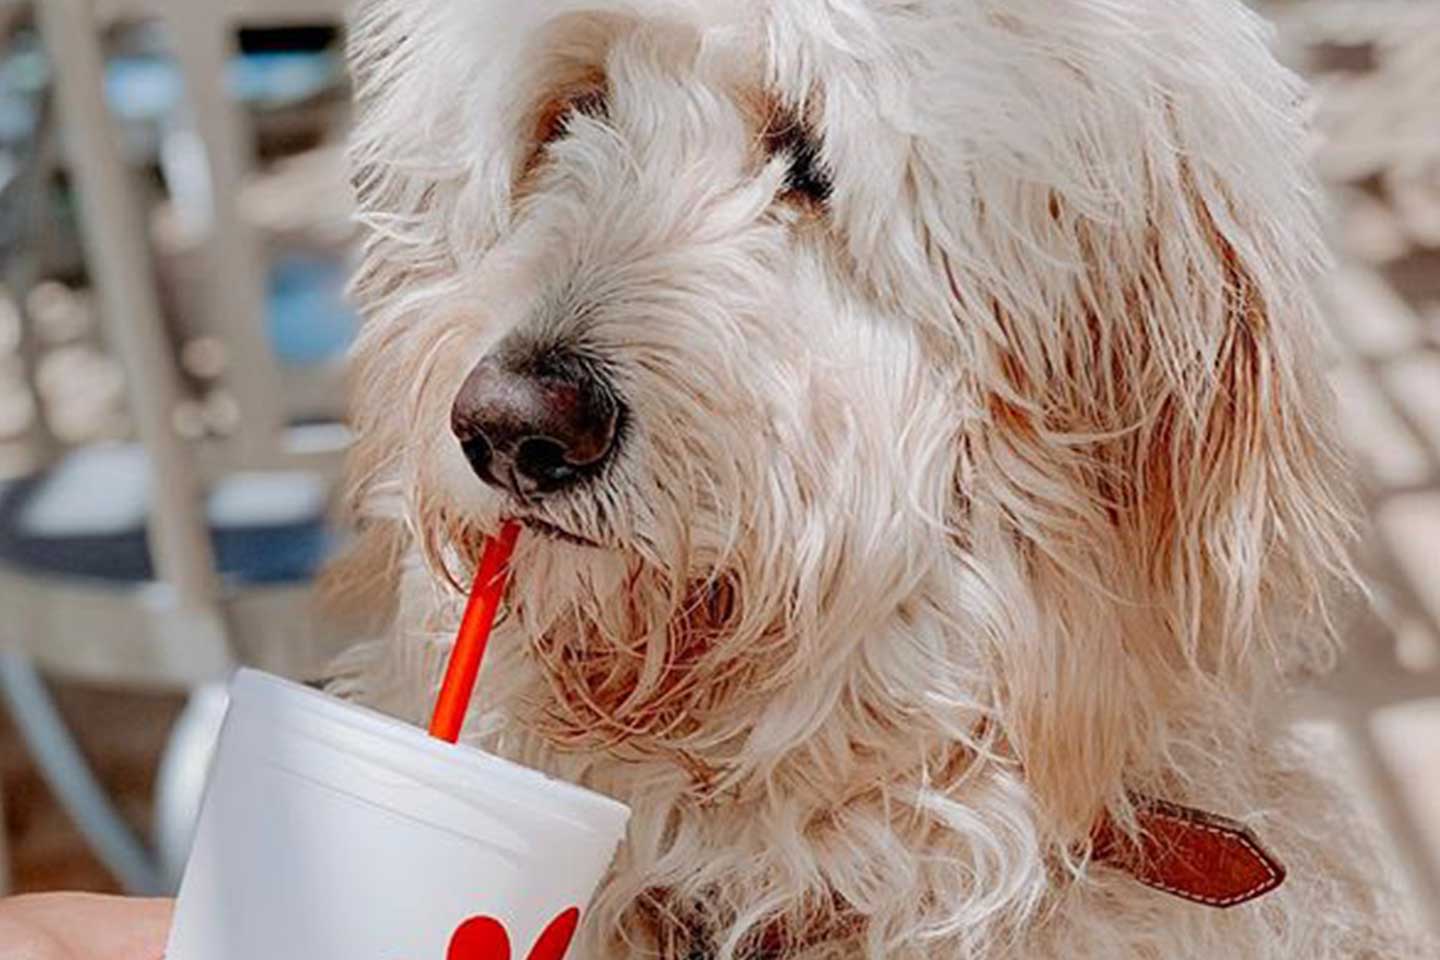 Woof Fle Fries And Nuggets: The Dogs Of Chick Fil A. Chick Fil A